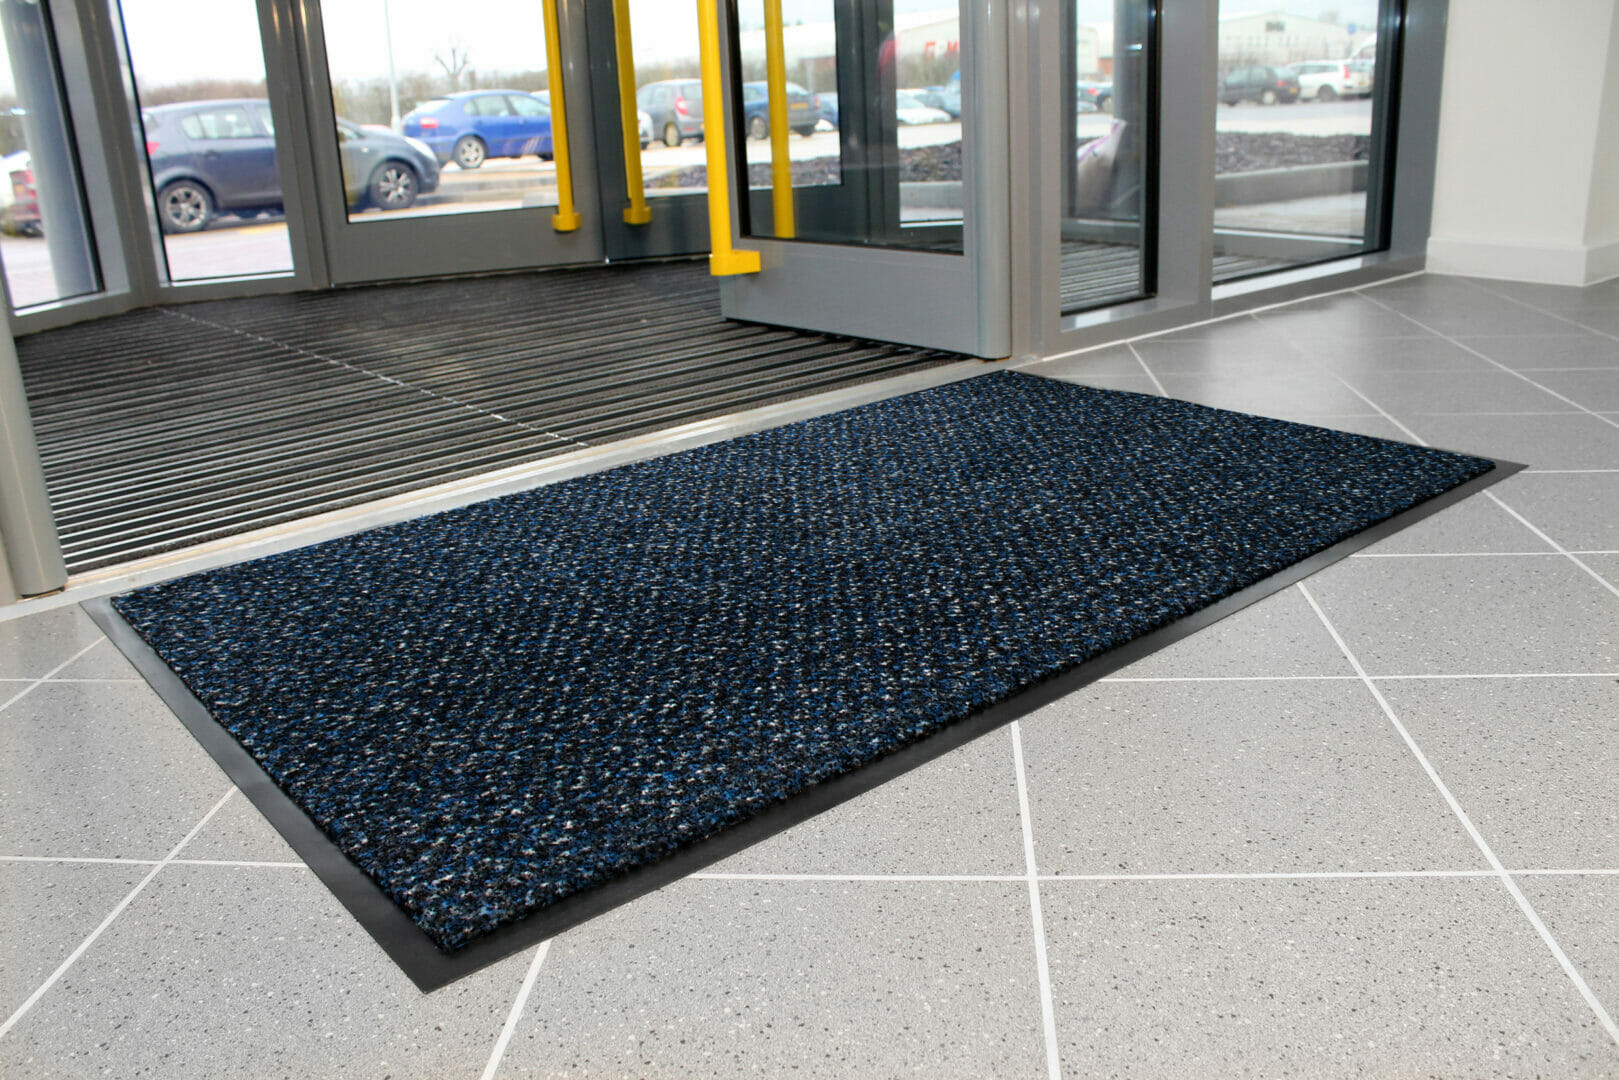 Are Your Entrance Mats a Fire Risk?